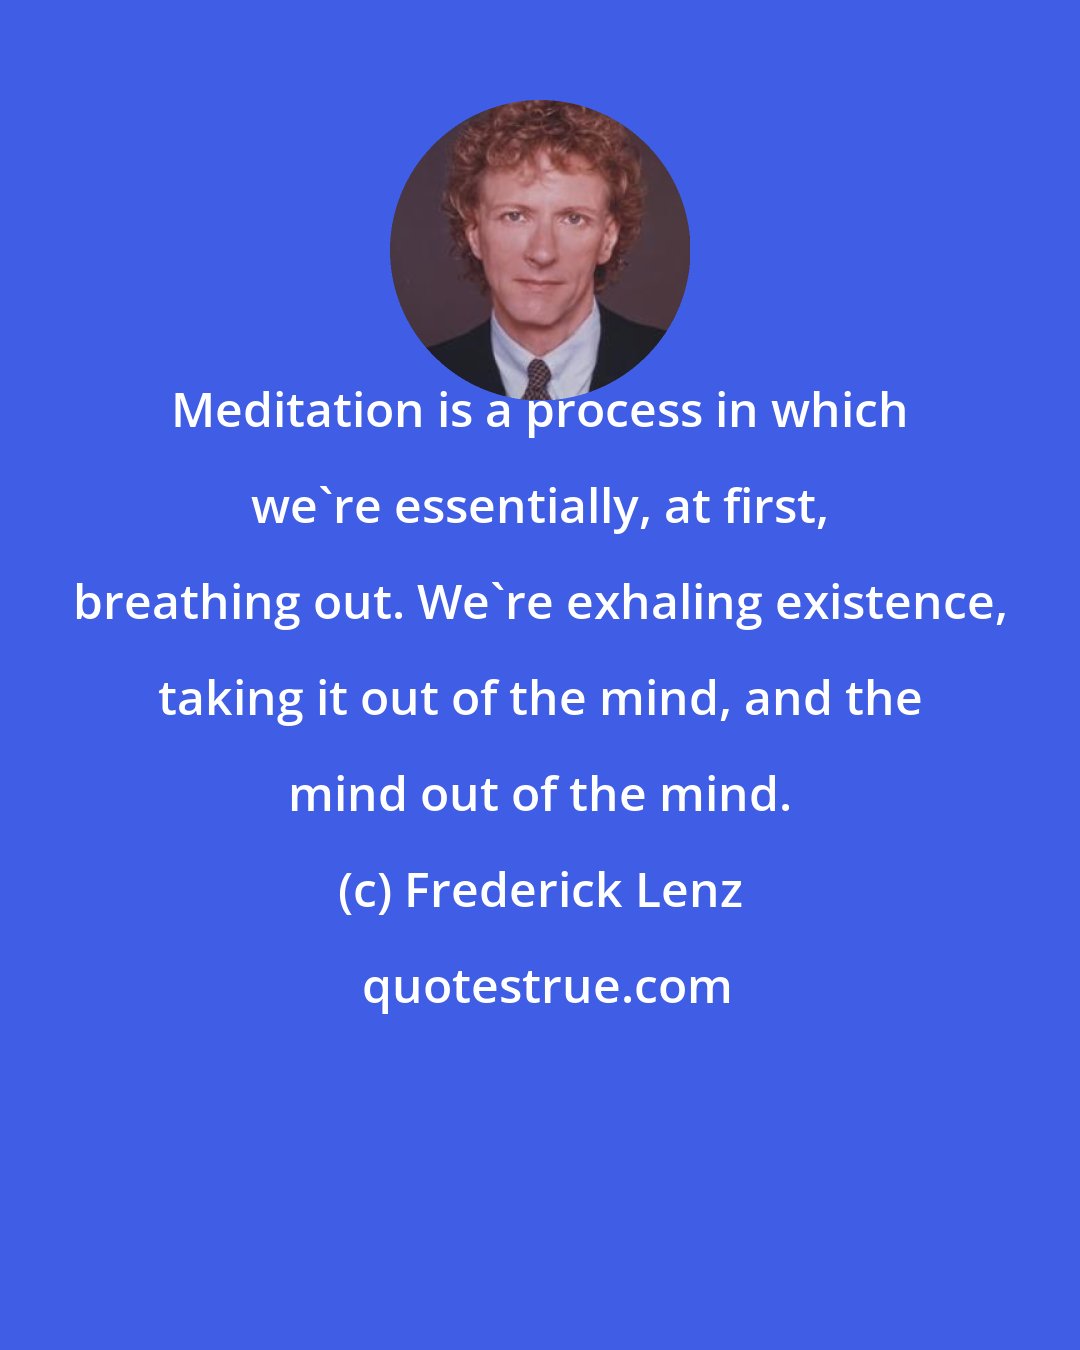 Frederick Lenz: Meditation is a process in which we're essentially, at first, breathing out. We're exhaling existence, taking it out of the mind, and the mind out of the mind.